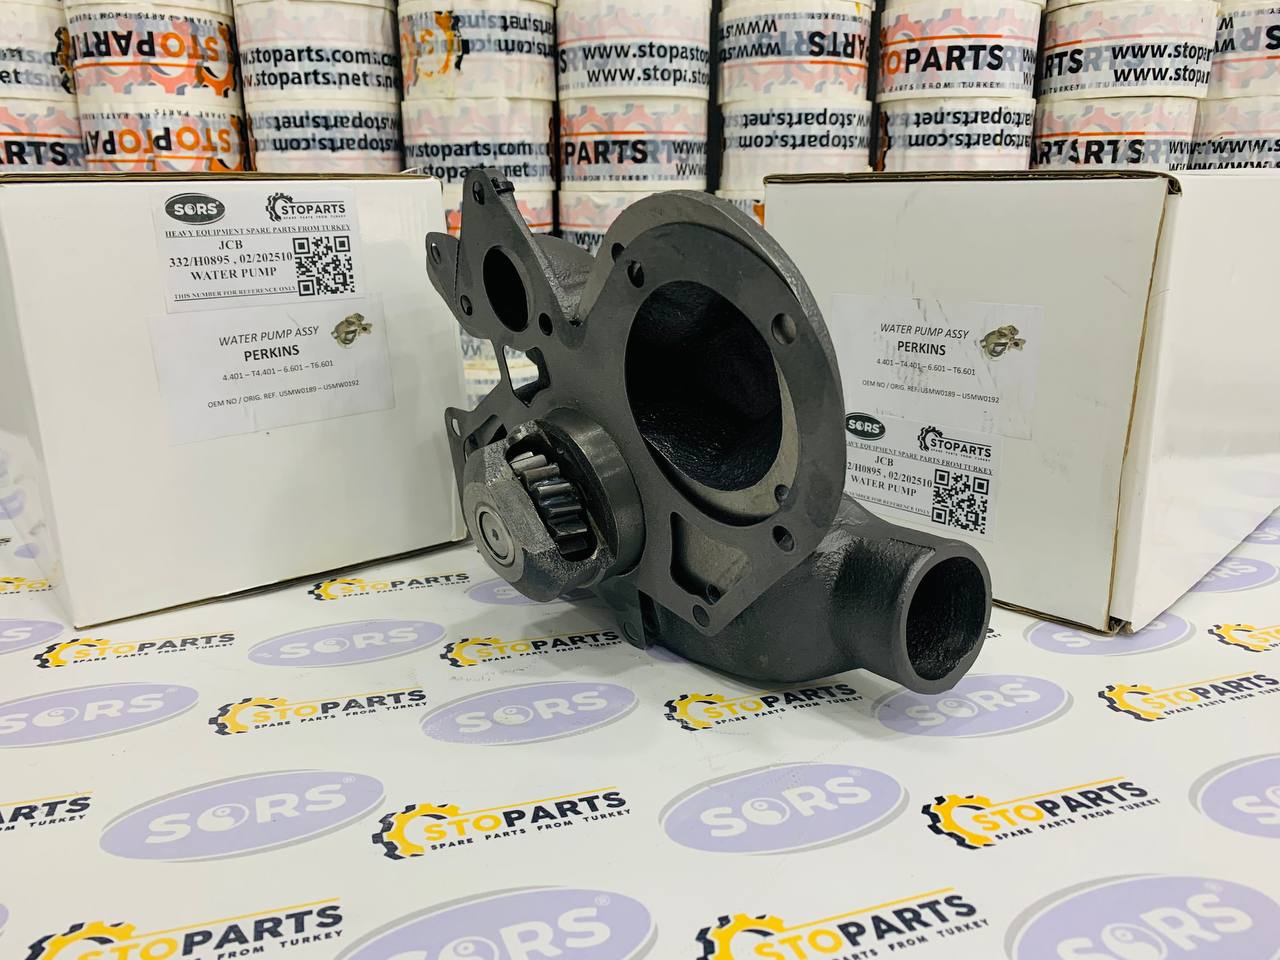 WATER PUMP 332/H0895, 02/202510 FOR JCB